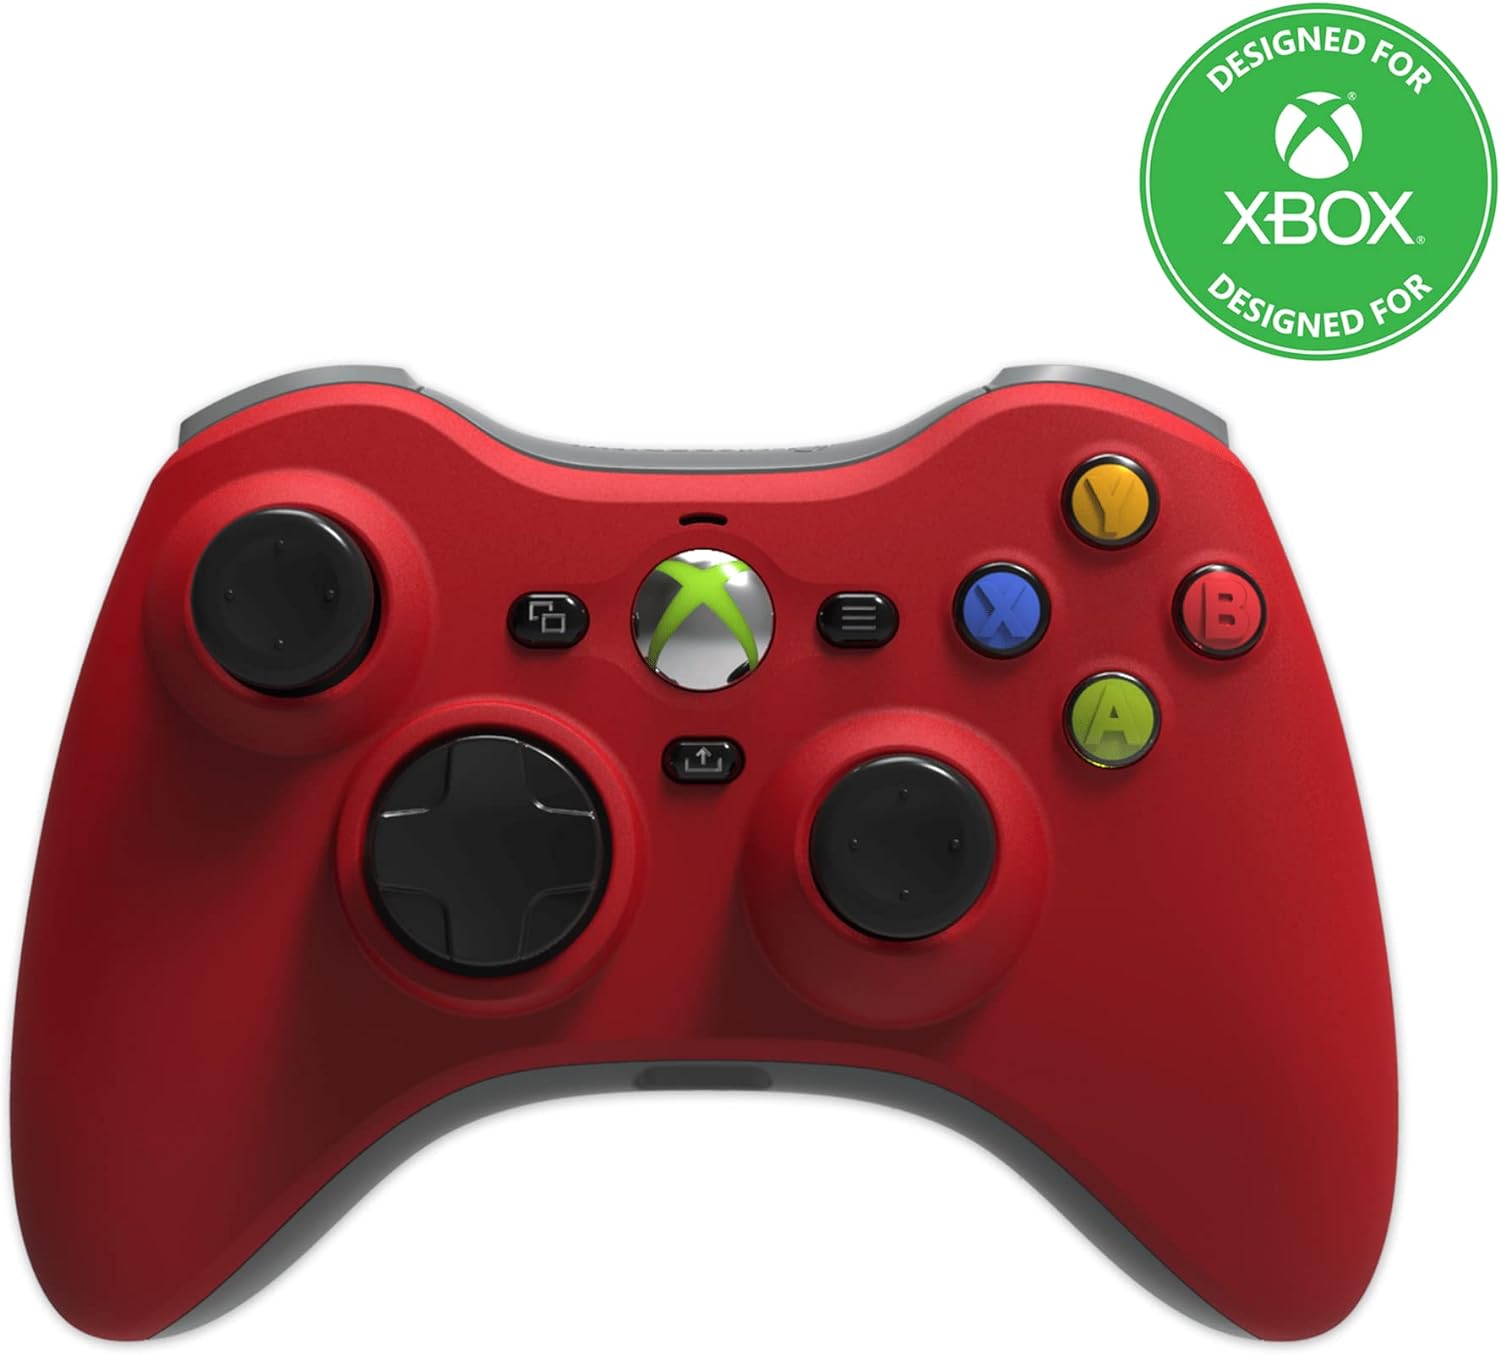 Hyperkin Xenon Wired Controller for Microsoft Xbox One / Series S / X